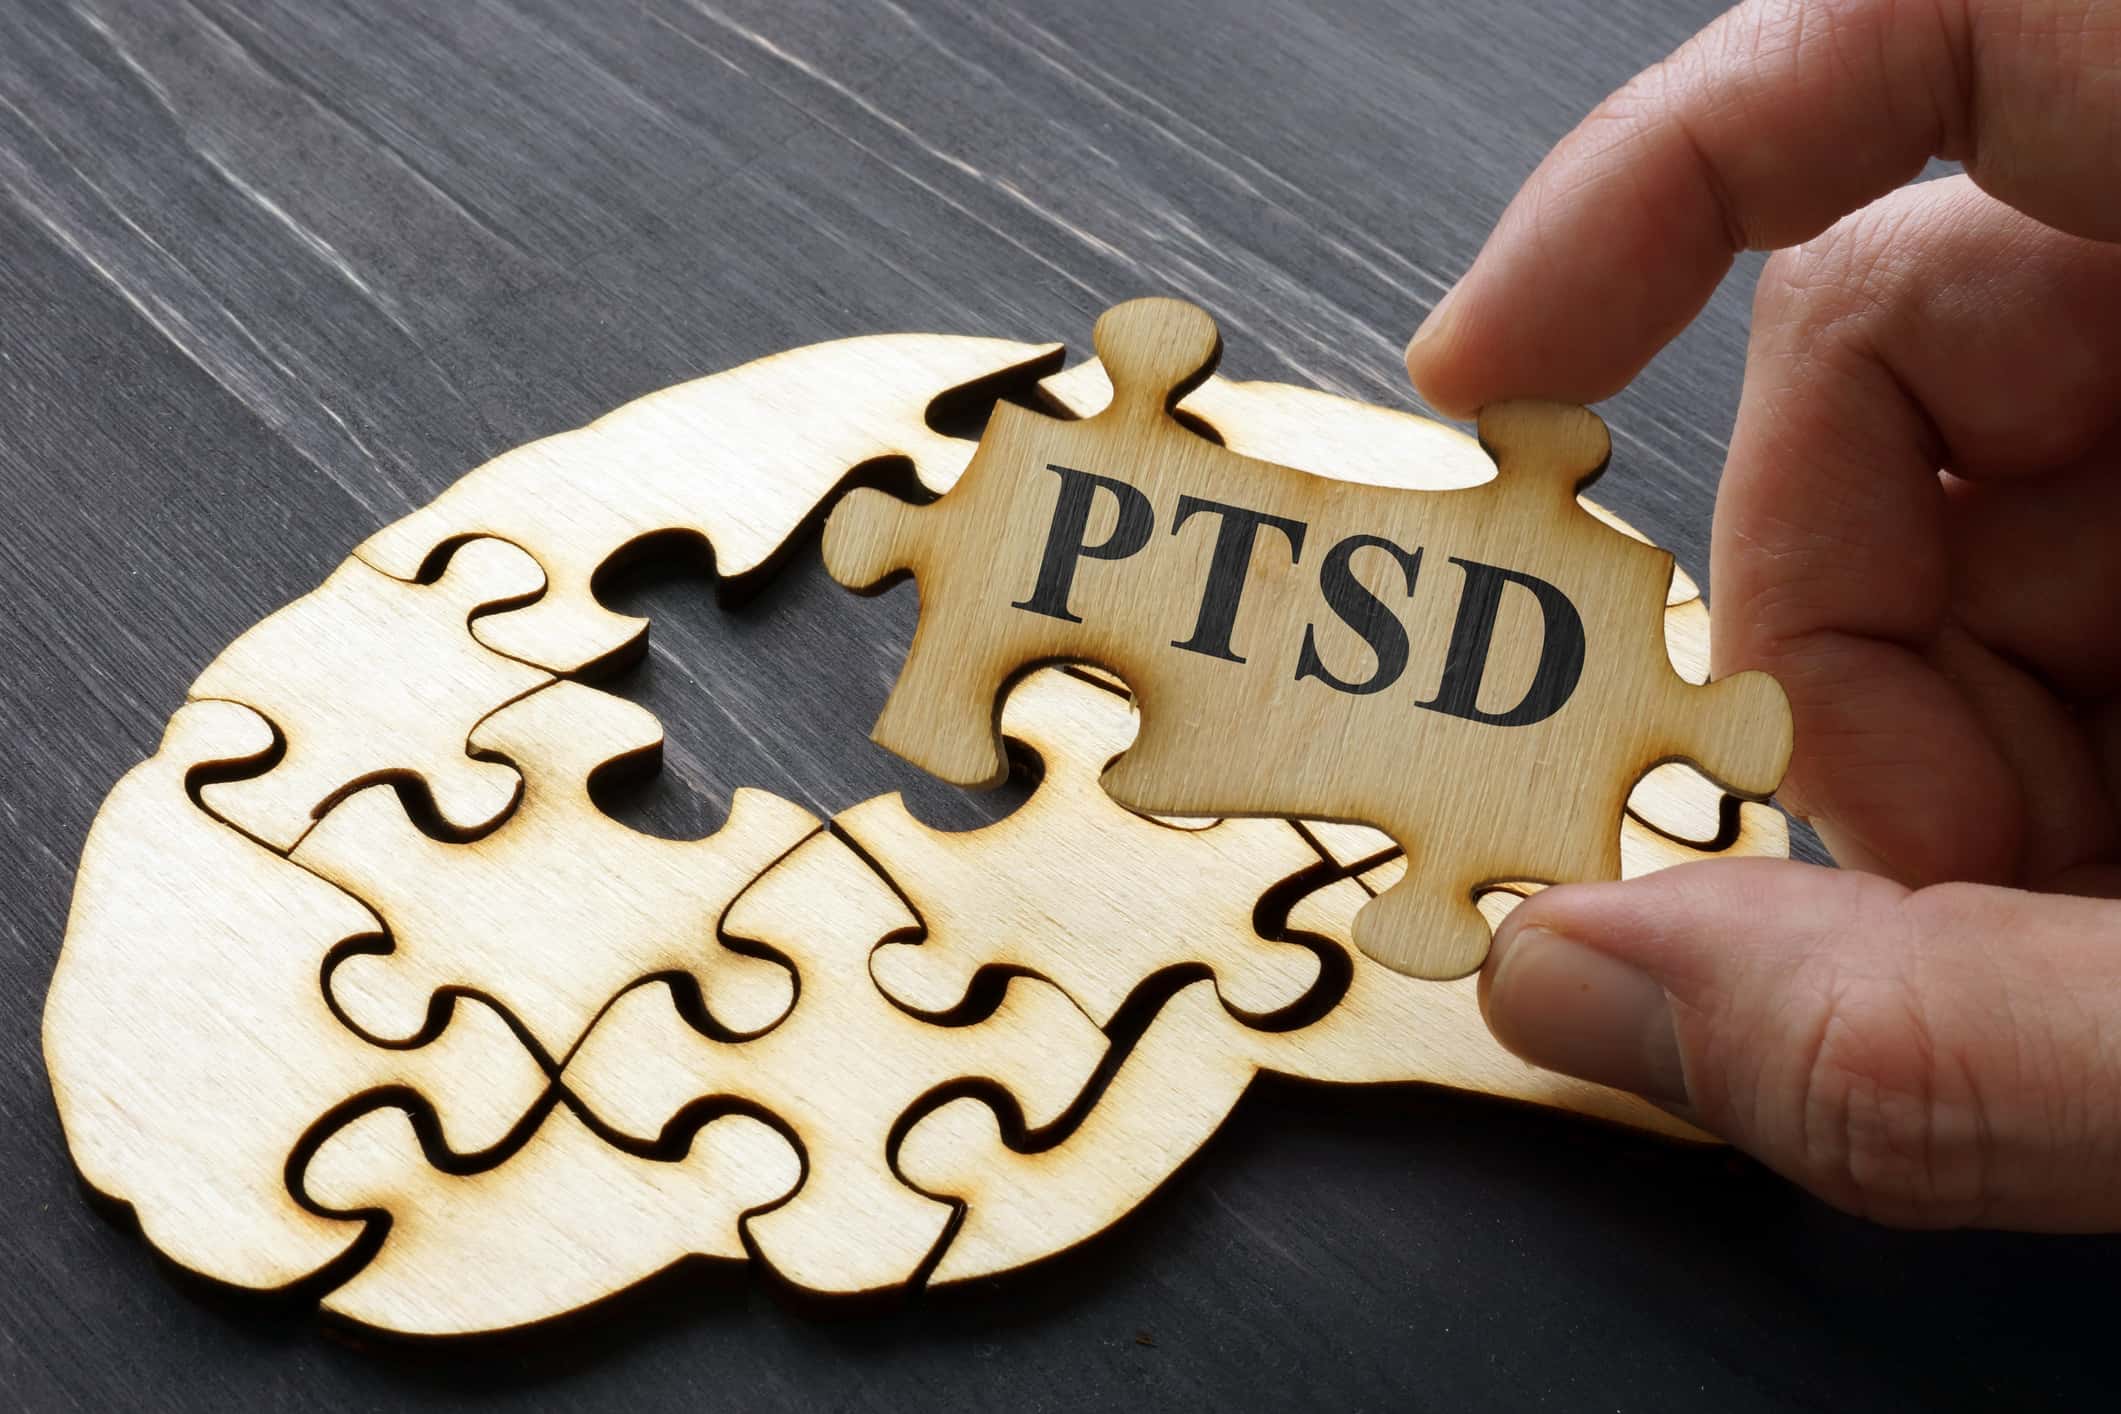 A puzzle in the shape of a brain with PTSD written on one puzzle piece